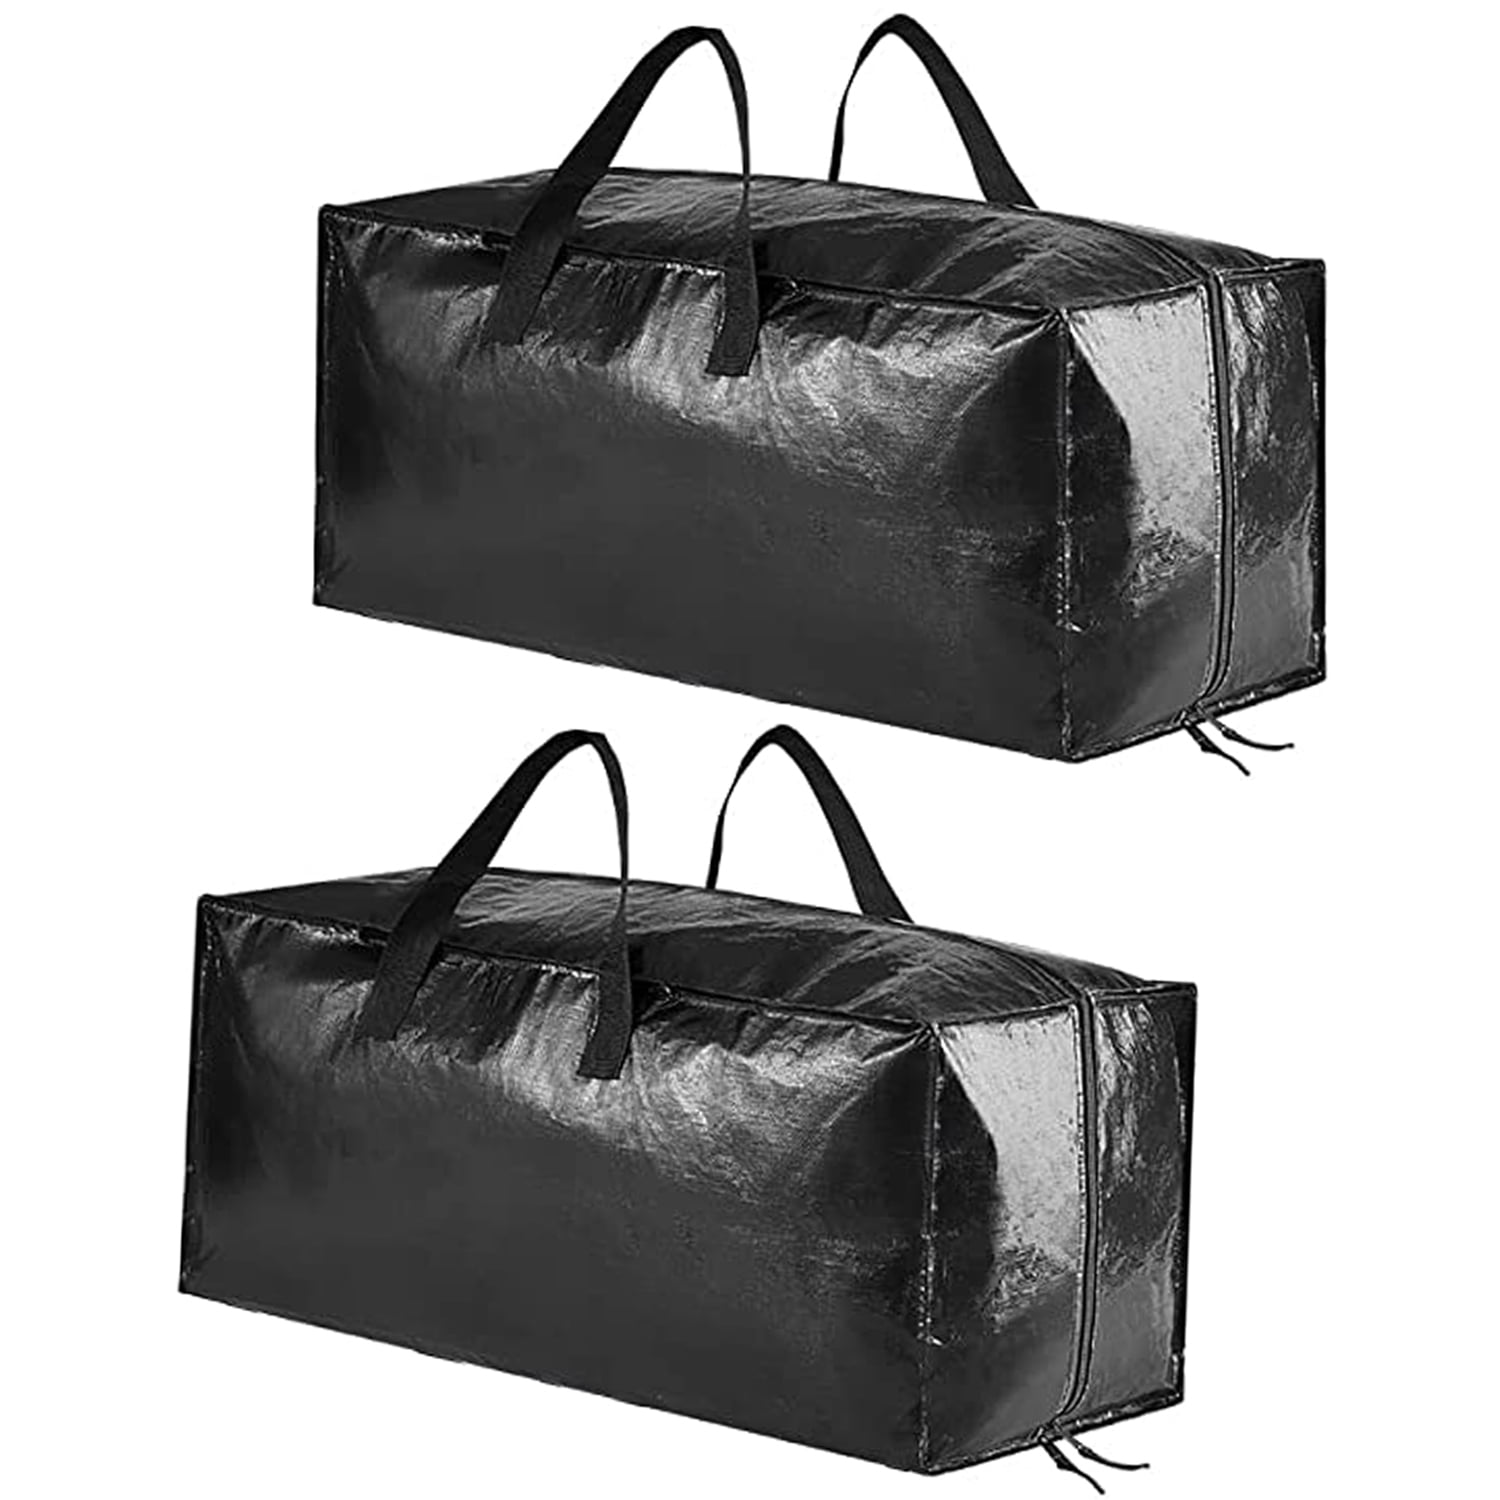 57 Gallon Extra Large Storage Bags, XXL Jumbo Large Moving Bags Heavy 2 PACK